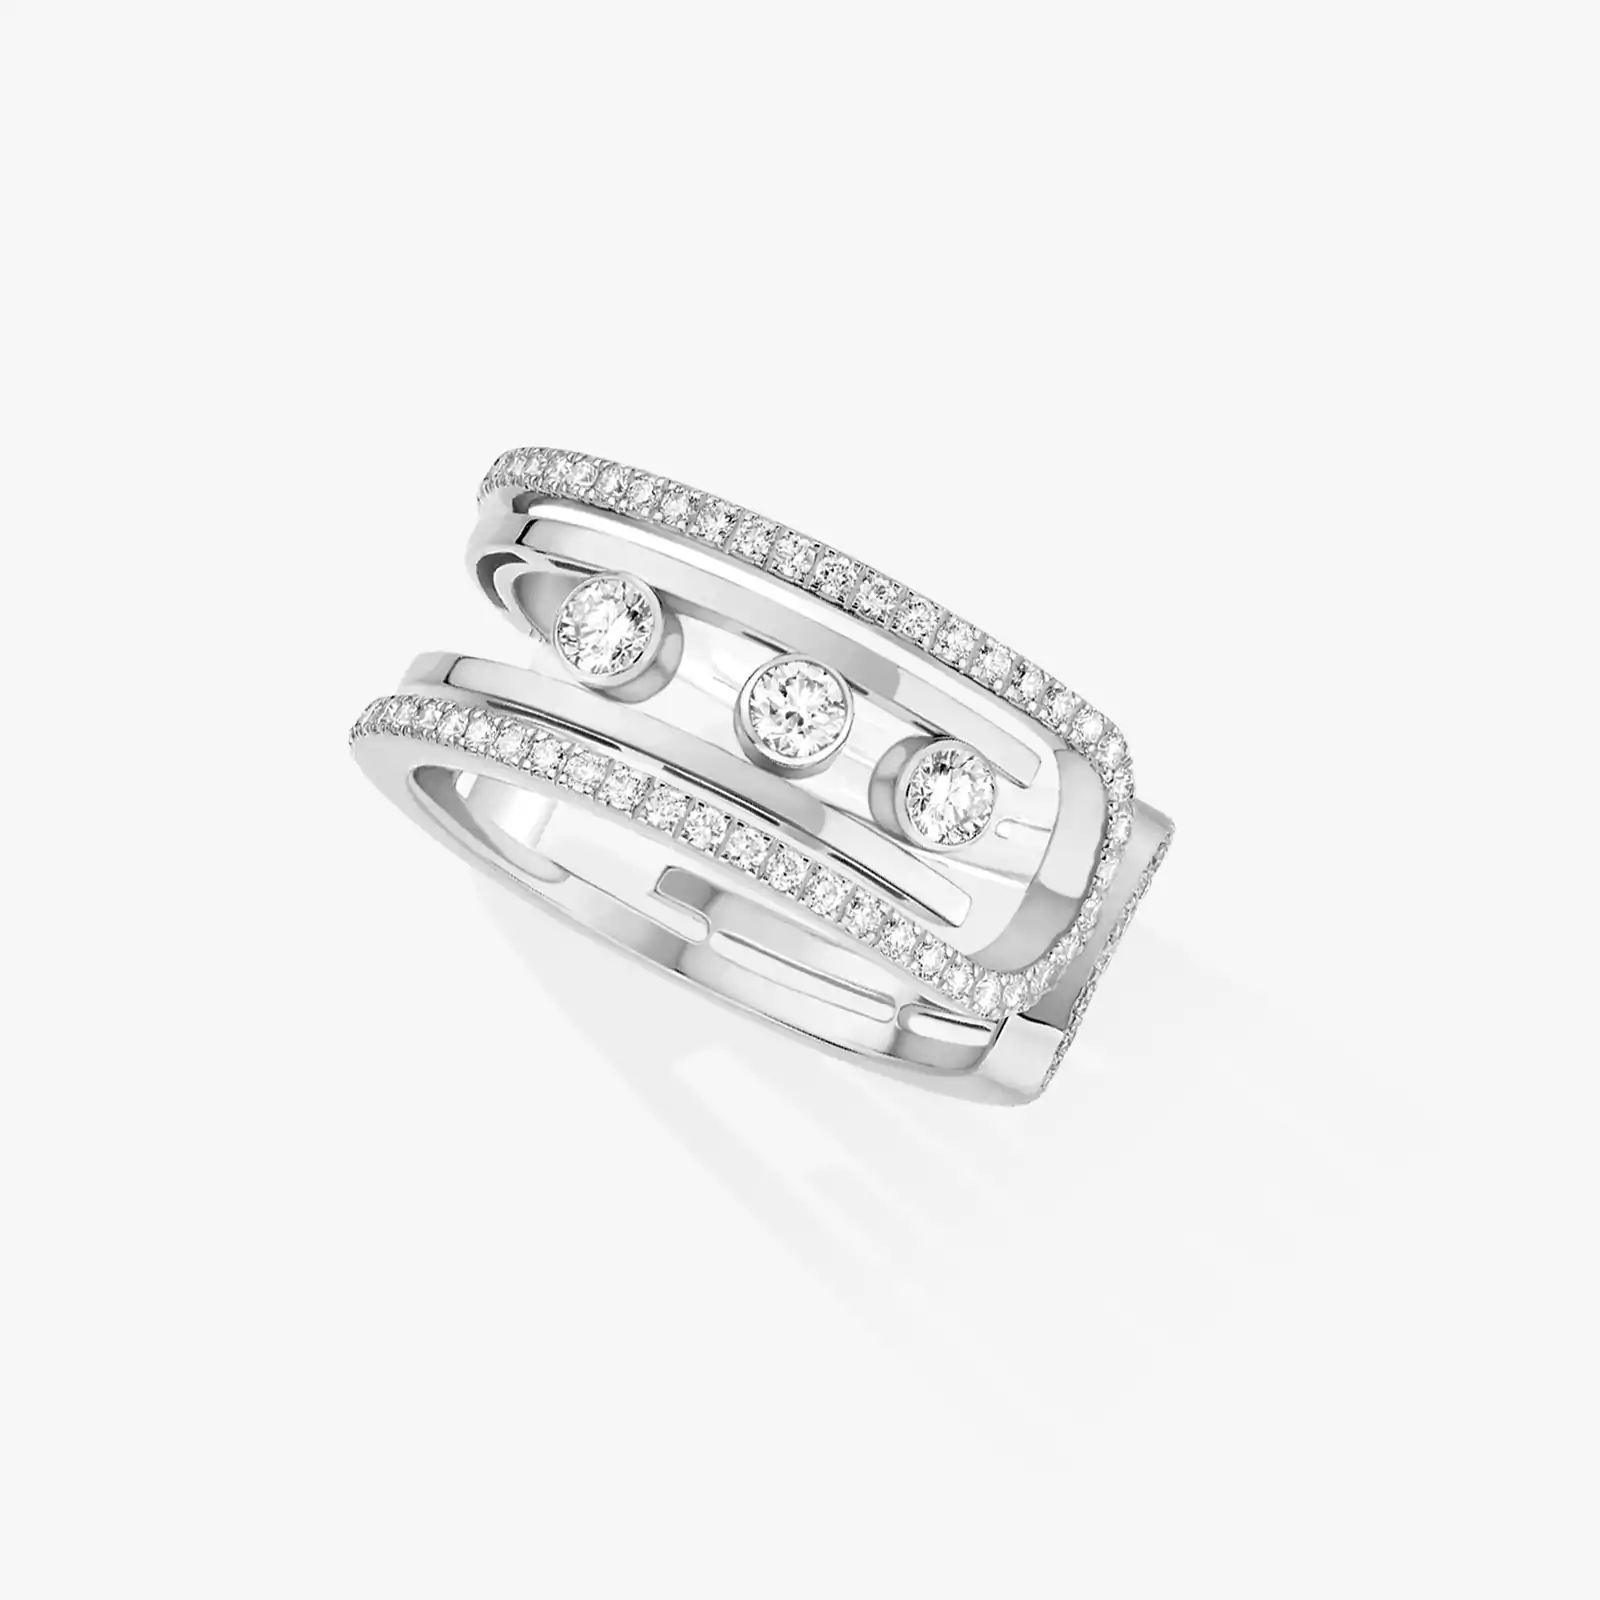 Move 10th White Gold For Her Diamond Ring 11955-WG